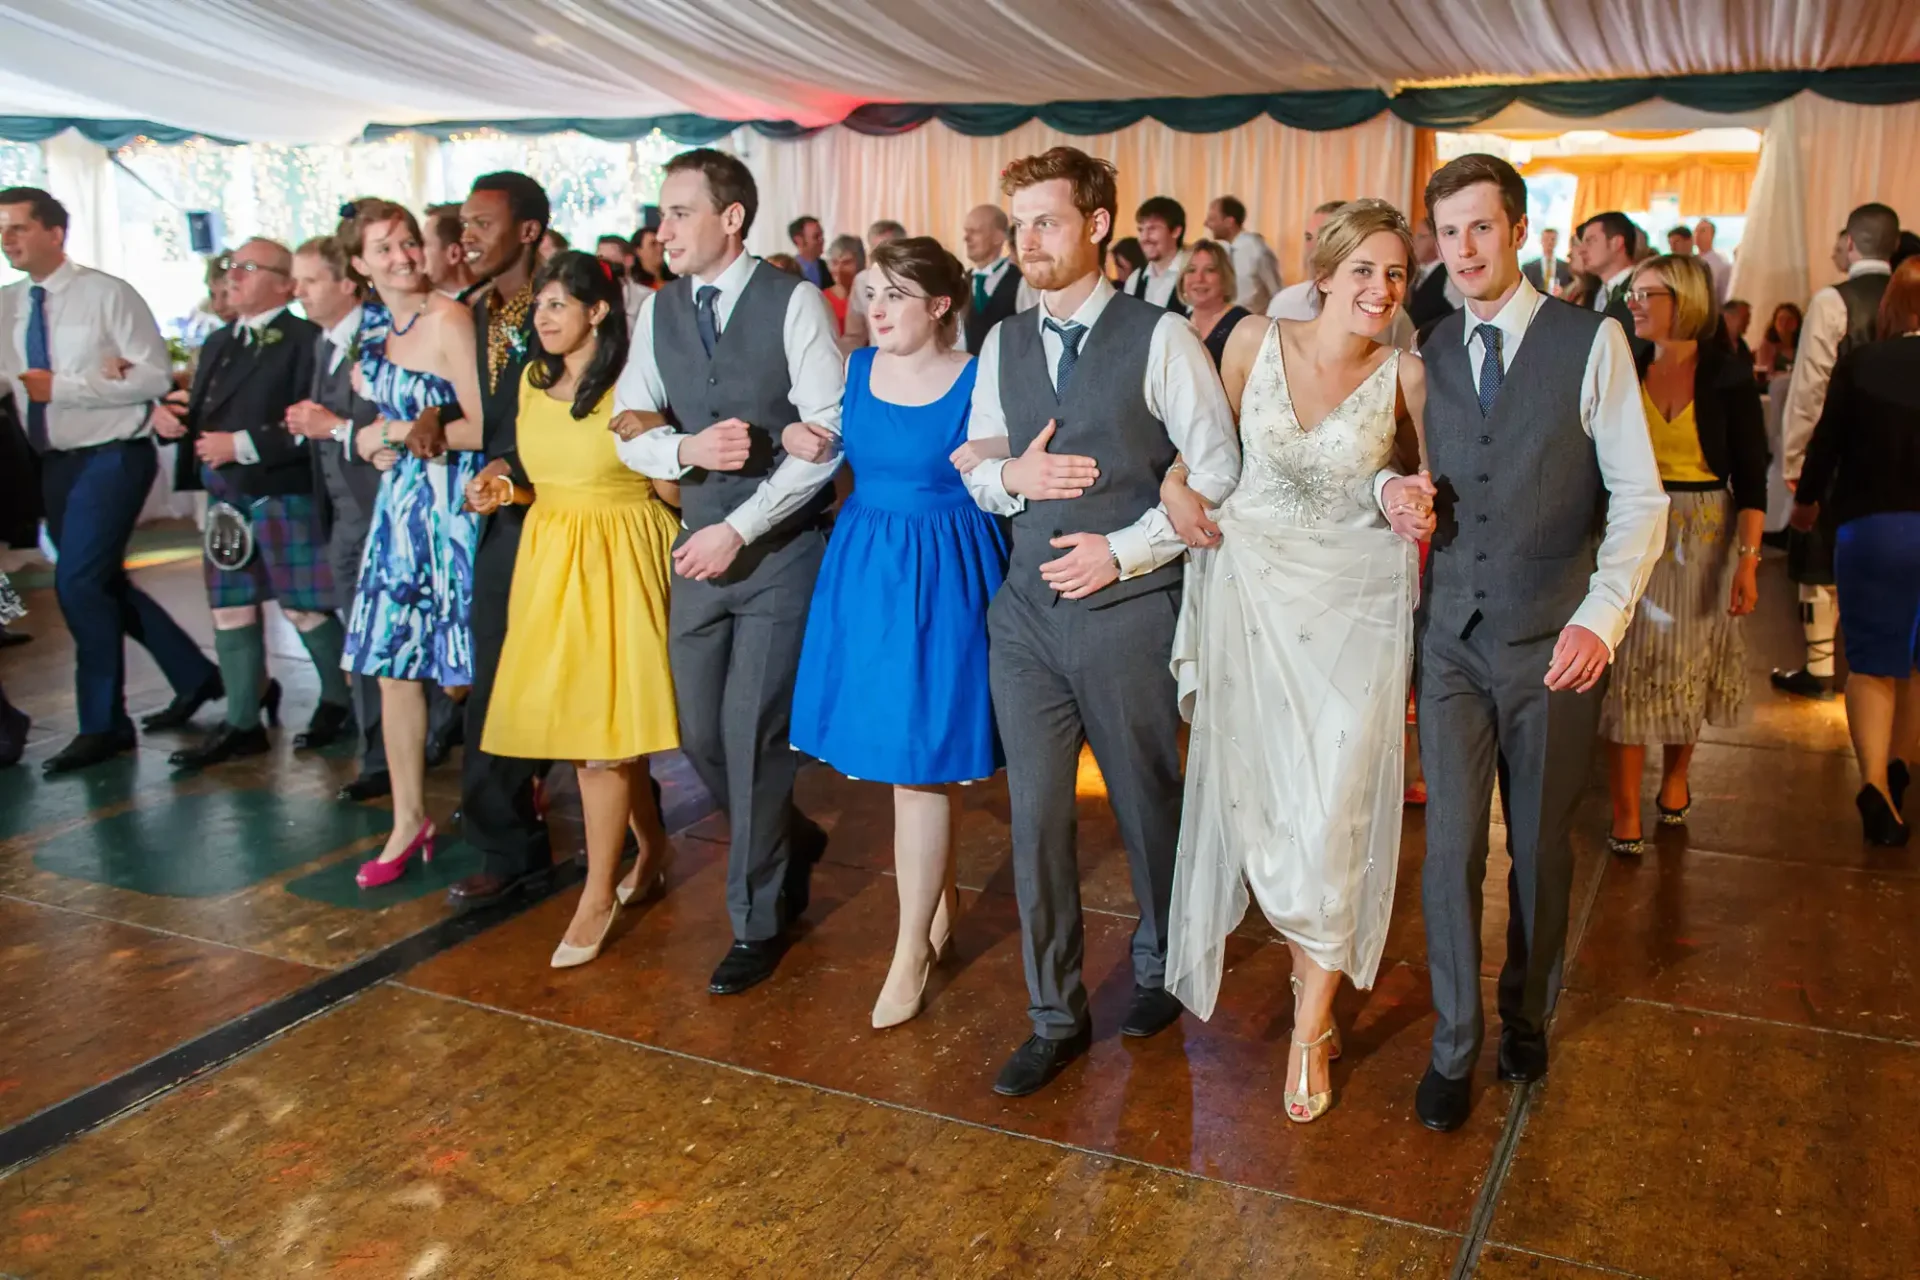 A joyful group of people, including a bride and groom, holding hands and dancing in a line at a wedding reception under a tent.